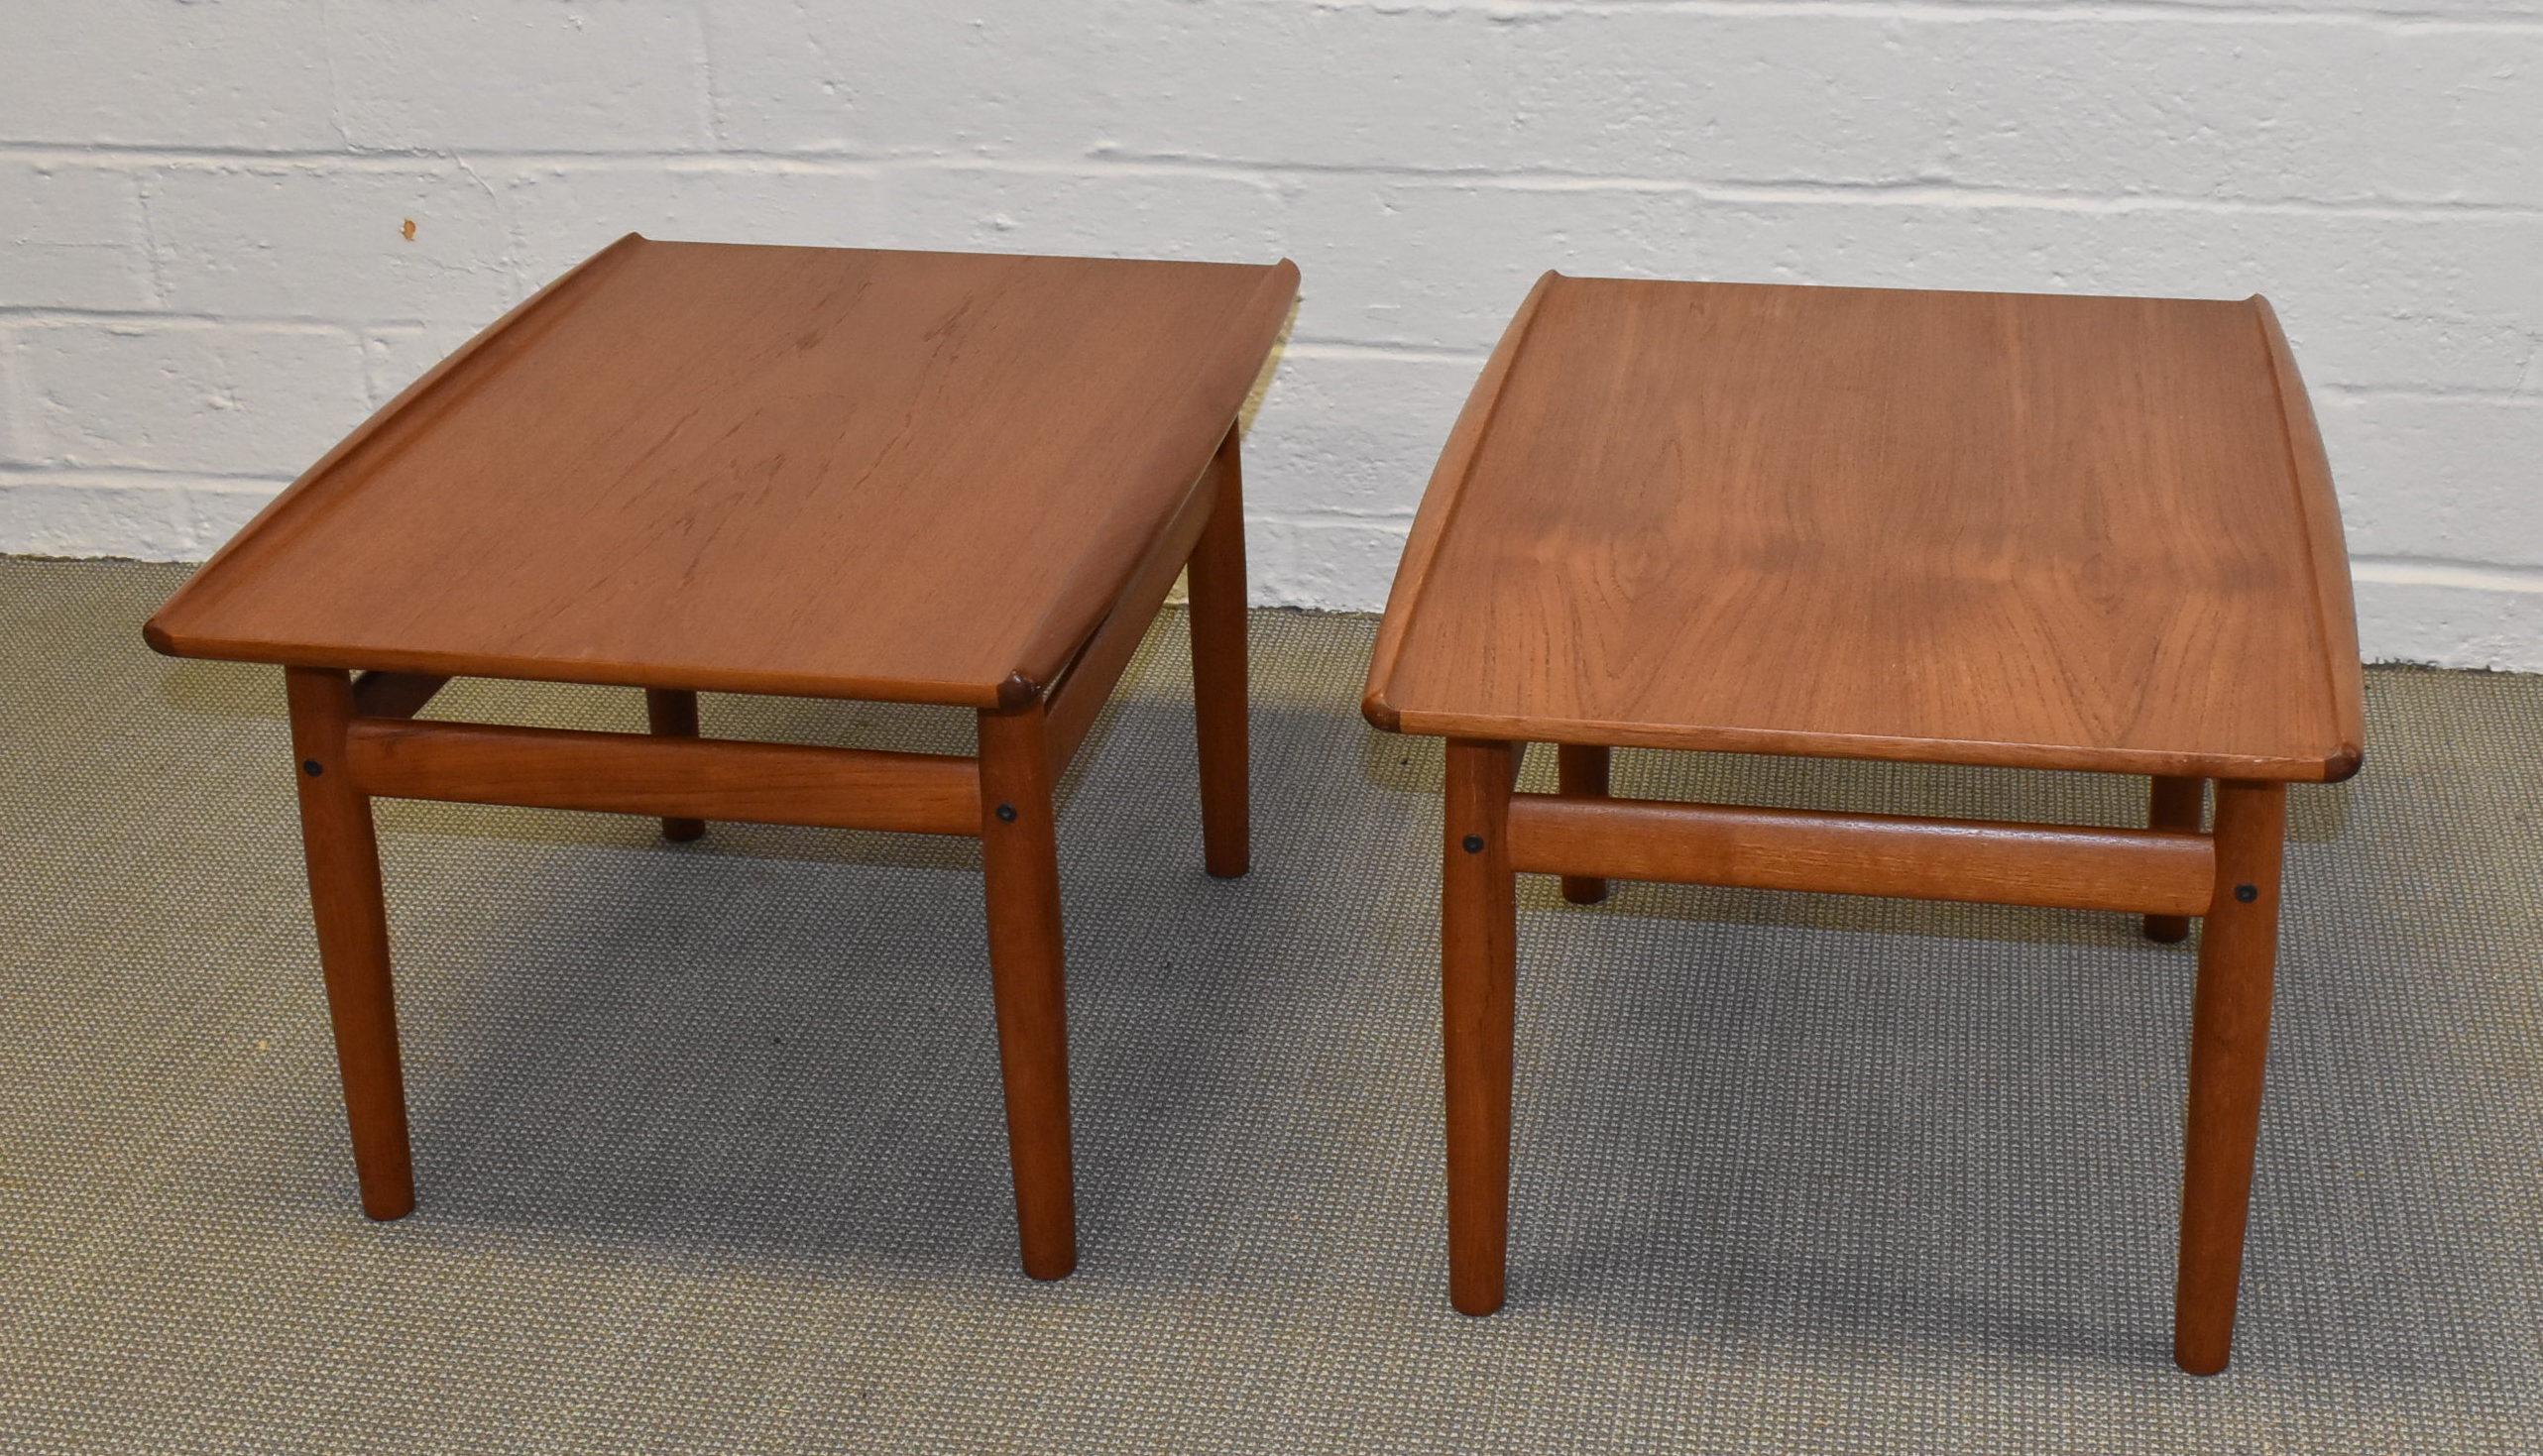 Pair of Mid-Century Modern teak side end tables. Very nice condition with original makers label. Designed by Grete Jalk for Glostrup Mobelfabrik. Dimensions of 20.5